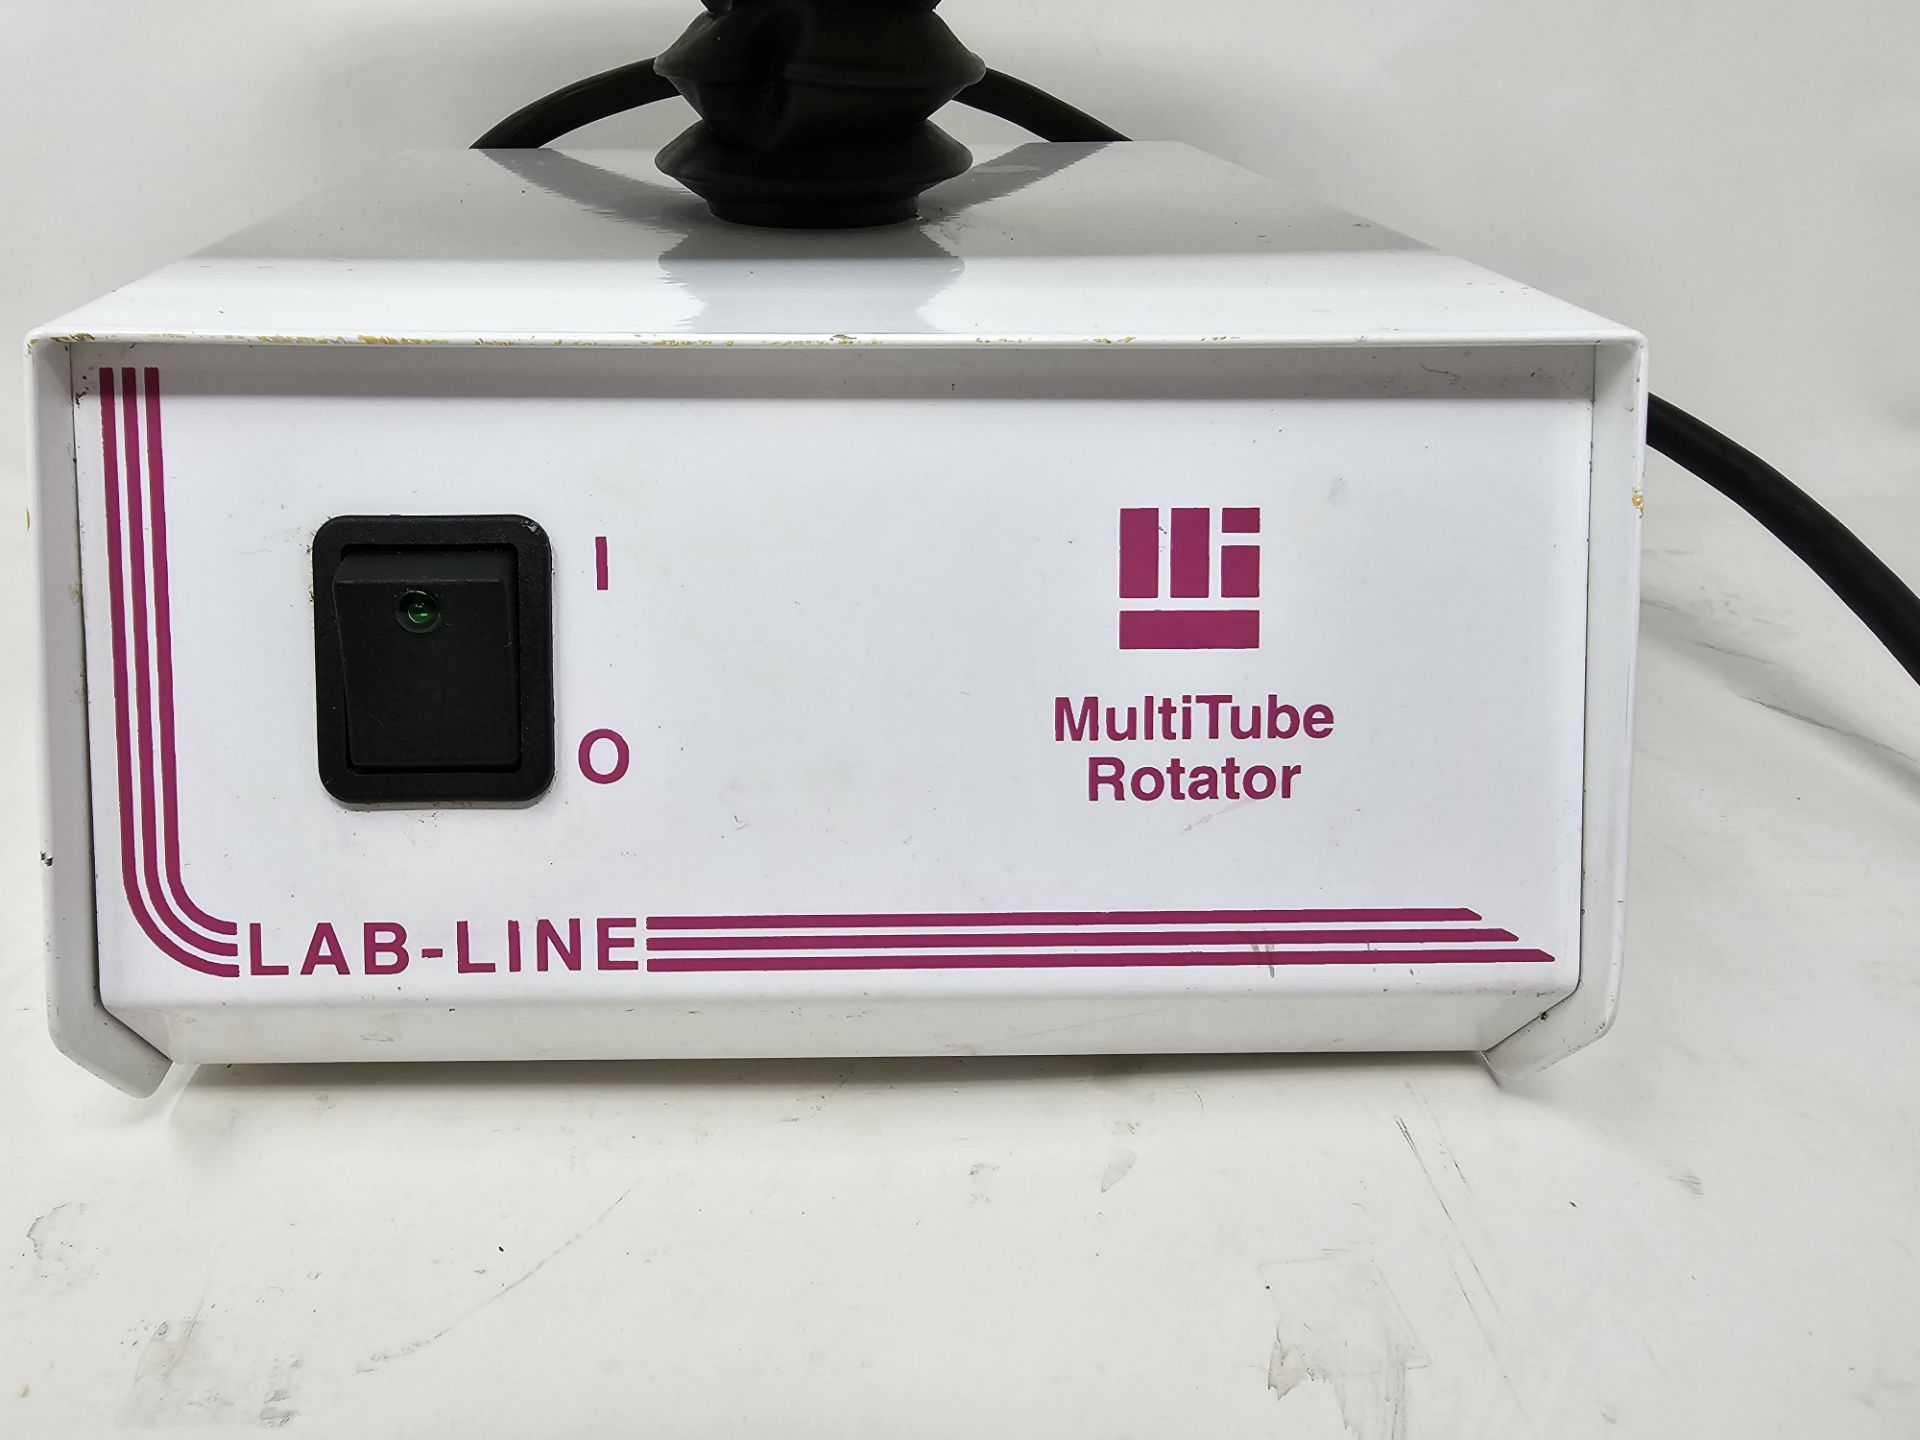 Lab-Line Model 4632 MultiTube Rotator sn 0101-0851 Bldg Loc: 1 This Lot Ships From: Three Rivers, - Image 3 of 4